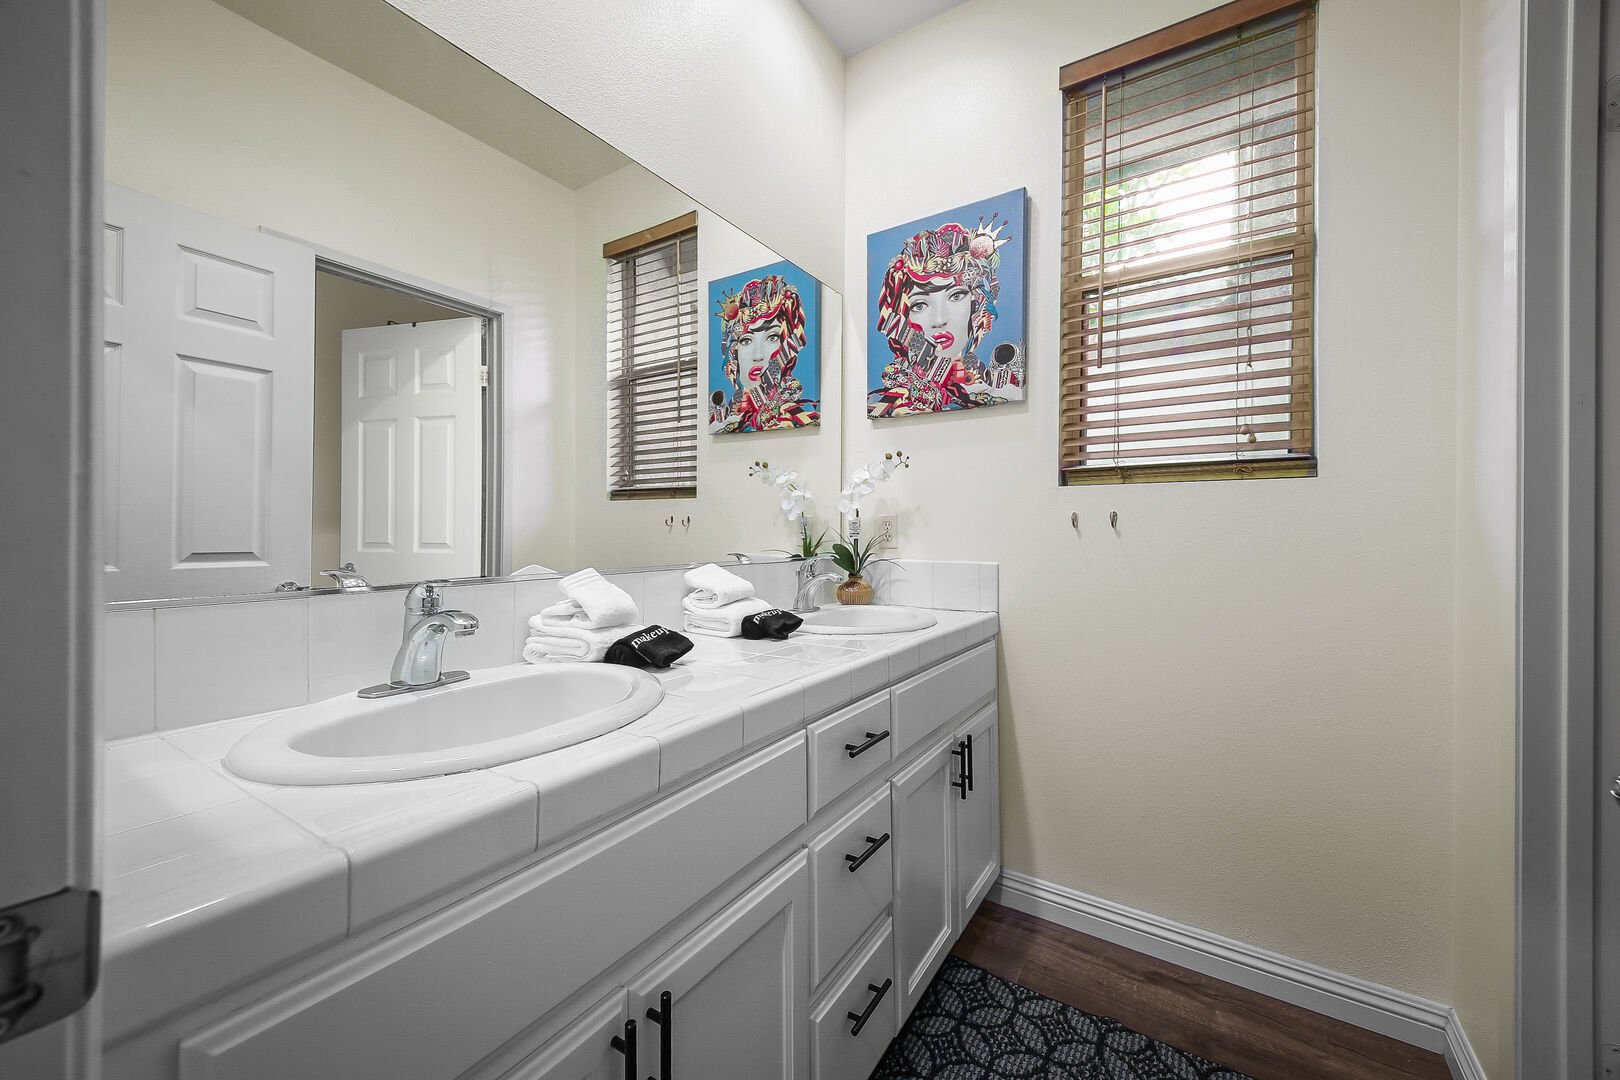 Hallway bathroom features a soaking tub, tile shower and a vanity sink.